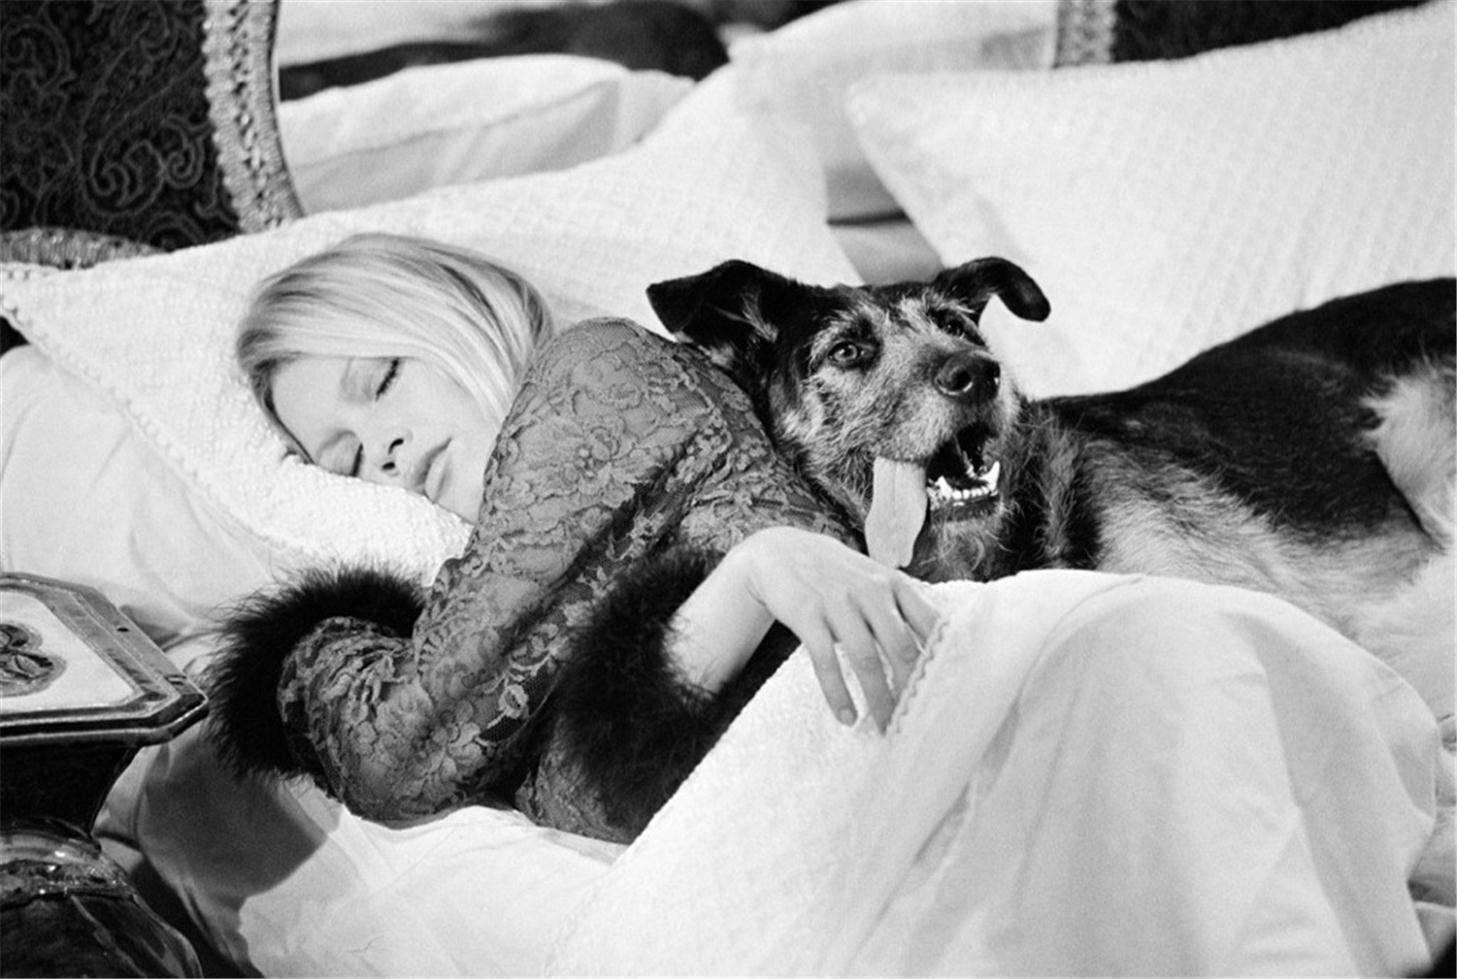 Brigitte Bardot with dog, on set of Les Novices (Co-signed)
Silver Gelatin Print
Edition of 50 
24 x 20 inches 
Cosigned by Terry O'Neill and Brigitte Bardot

French actress Brigitte Bardot during the filming of ‘The Novices’ (Les Novices, 1970)